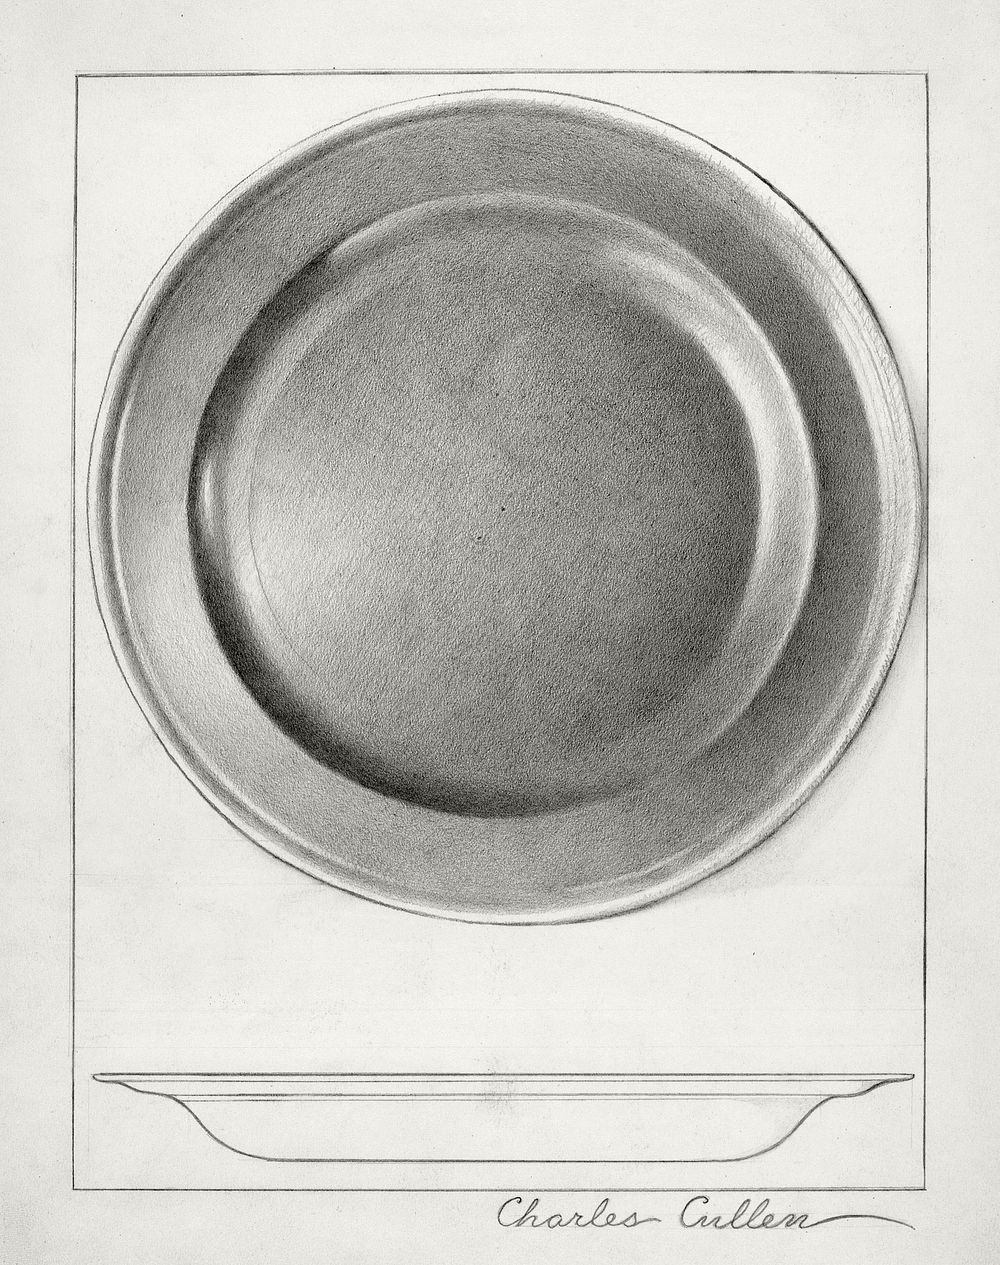 Pewter Plate (ca. 1936) by Charles Cullen. Original from The National Gallery of Art. Digitally enhanced by rawpixel.